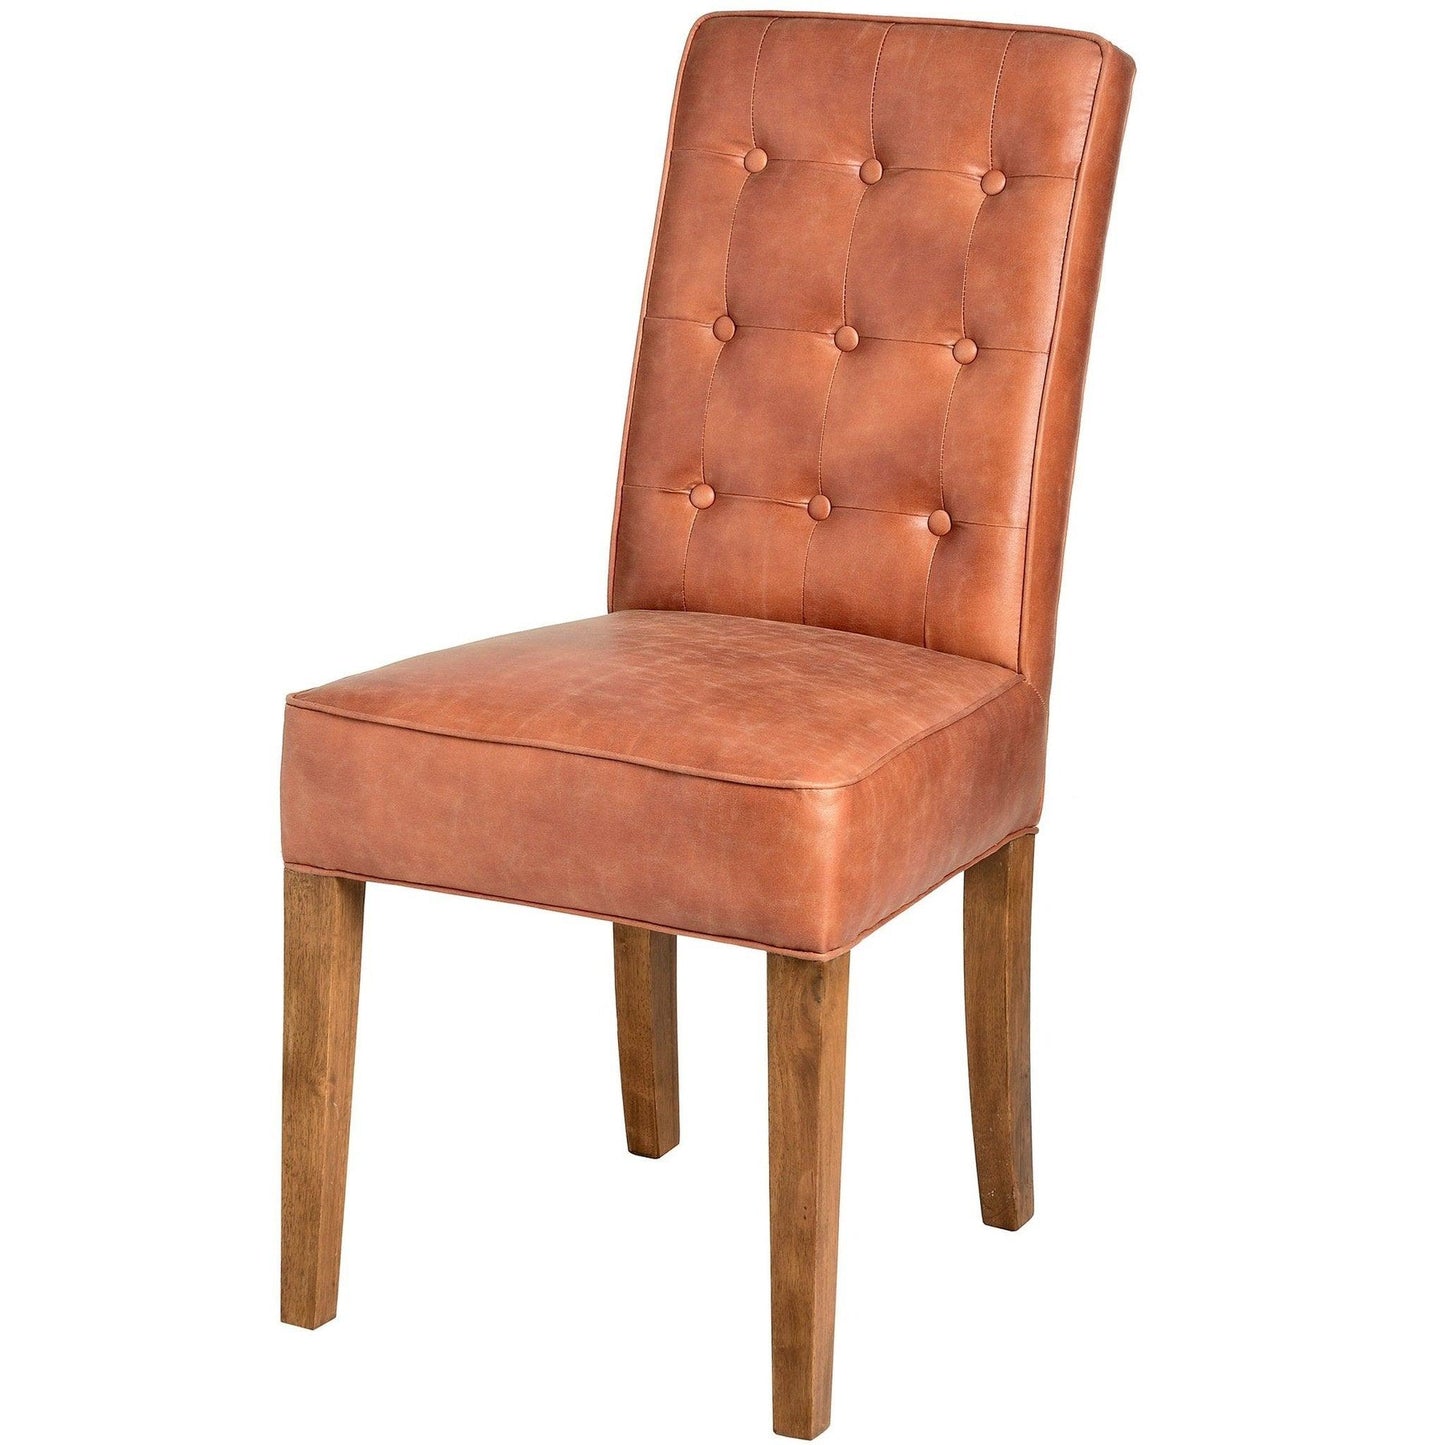 Tan Leather Dining Chair - Abode Decor